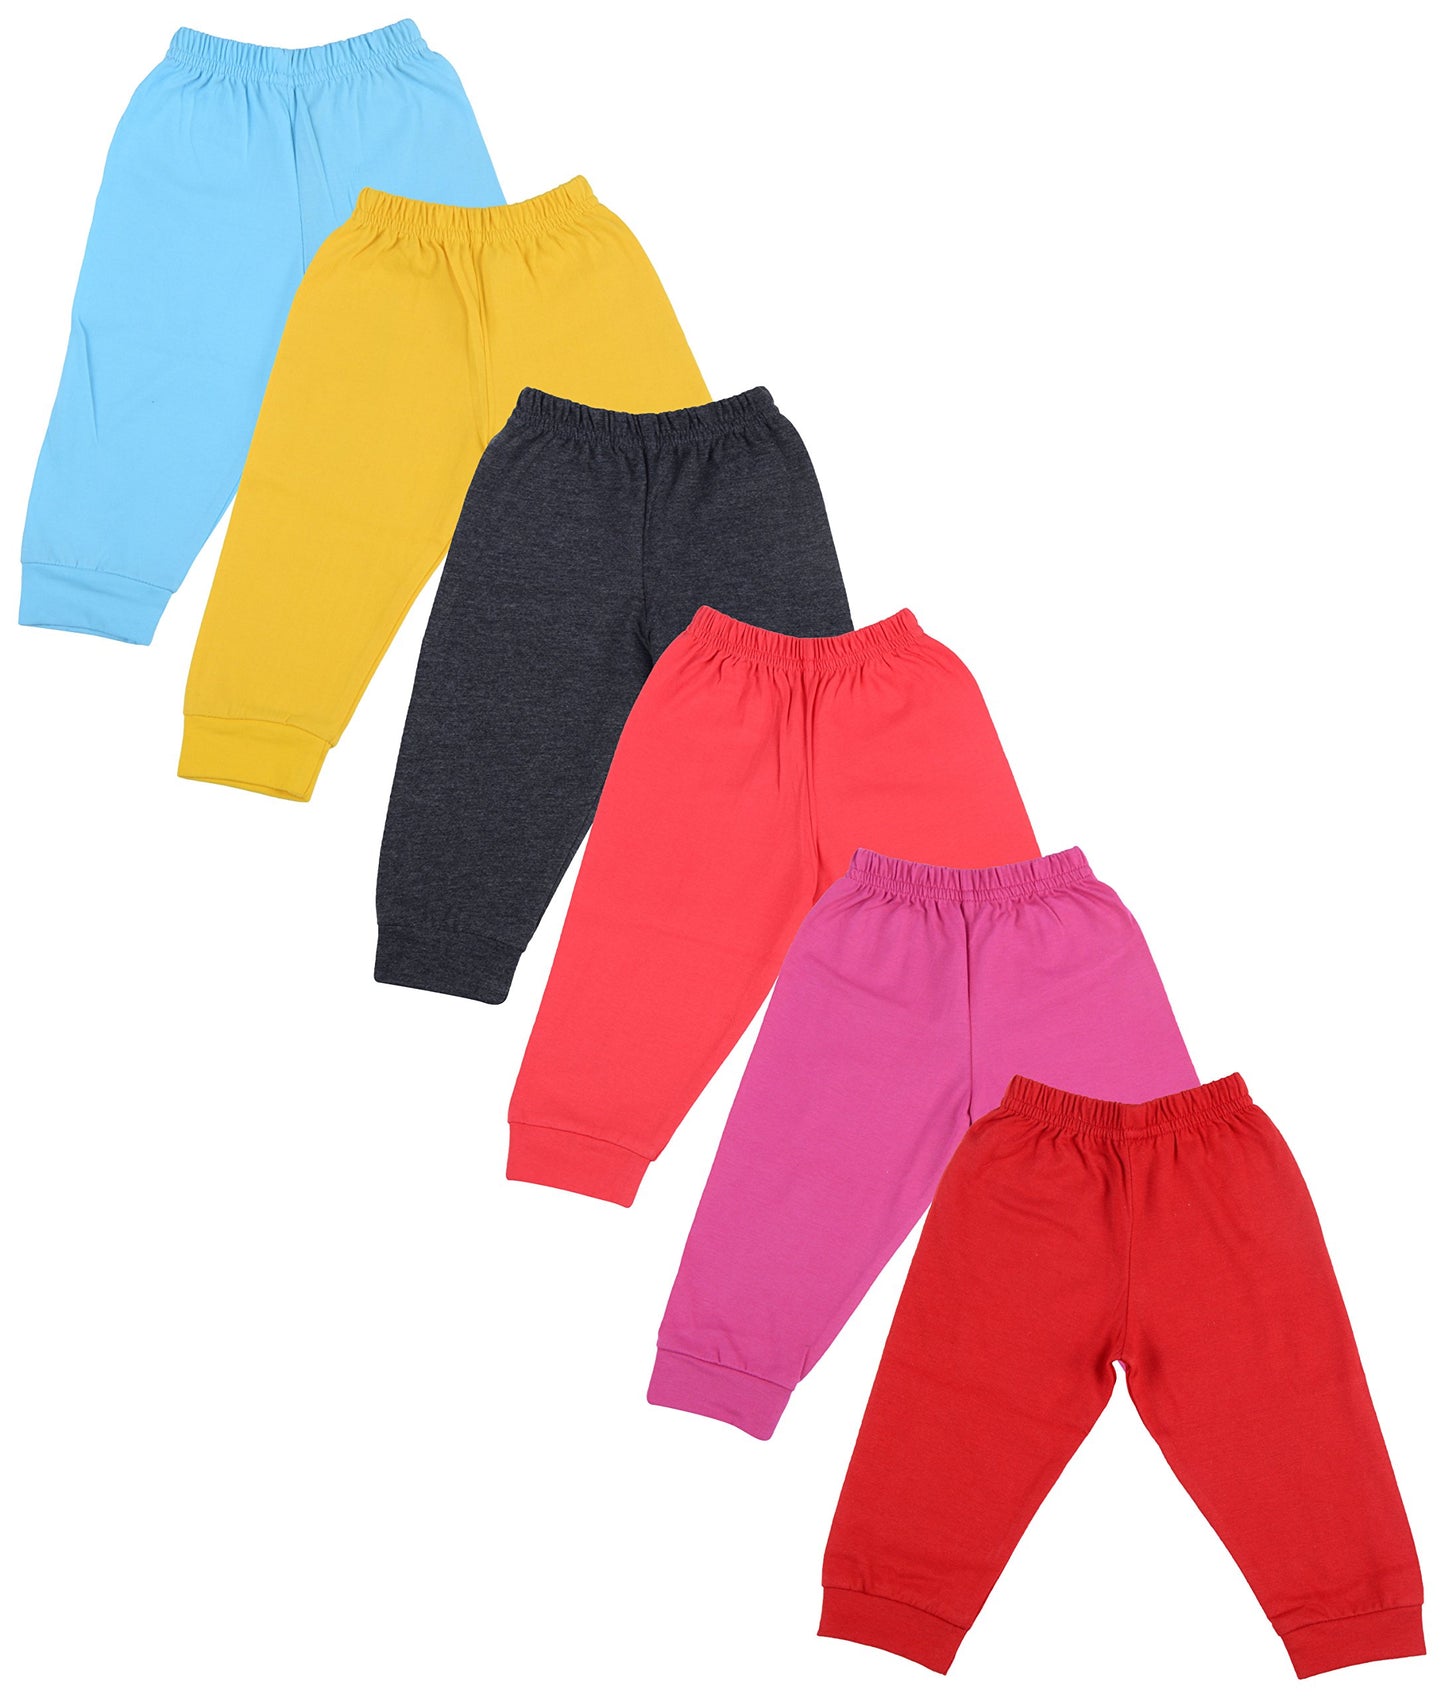 FirstVibe Baby Kids Soft Cotton Track Pants with Ribs, Pack of 6   1-1.5 Years